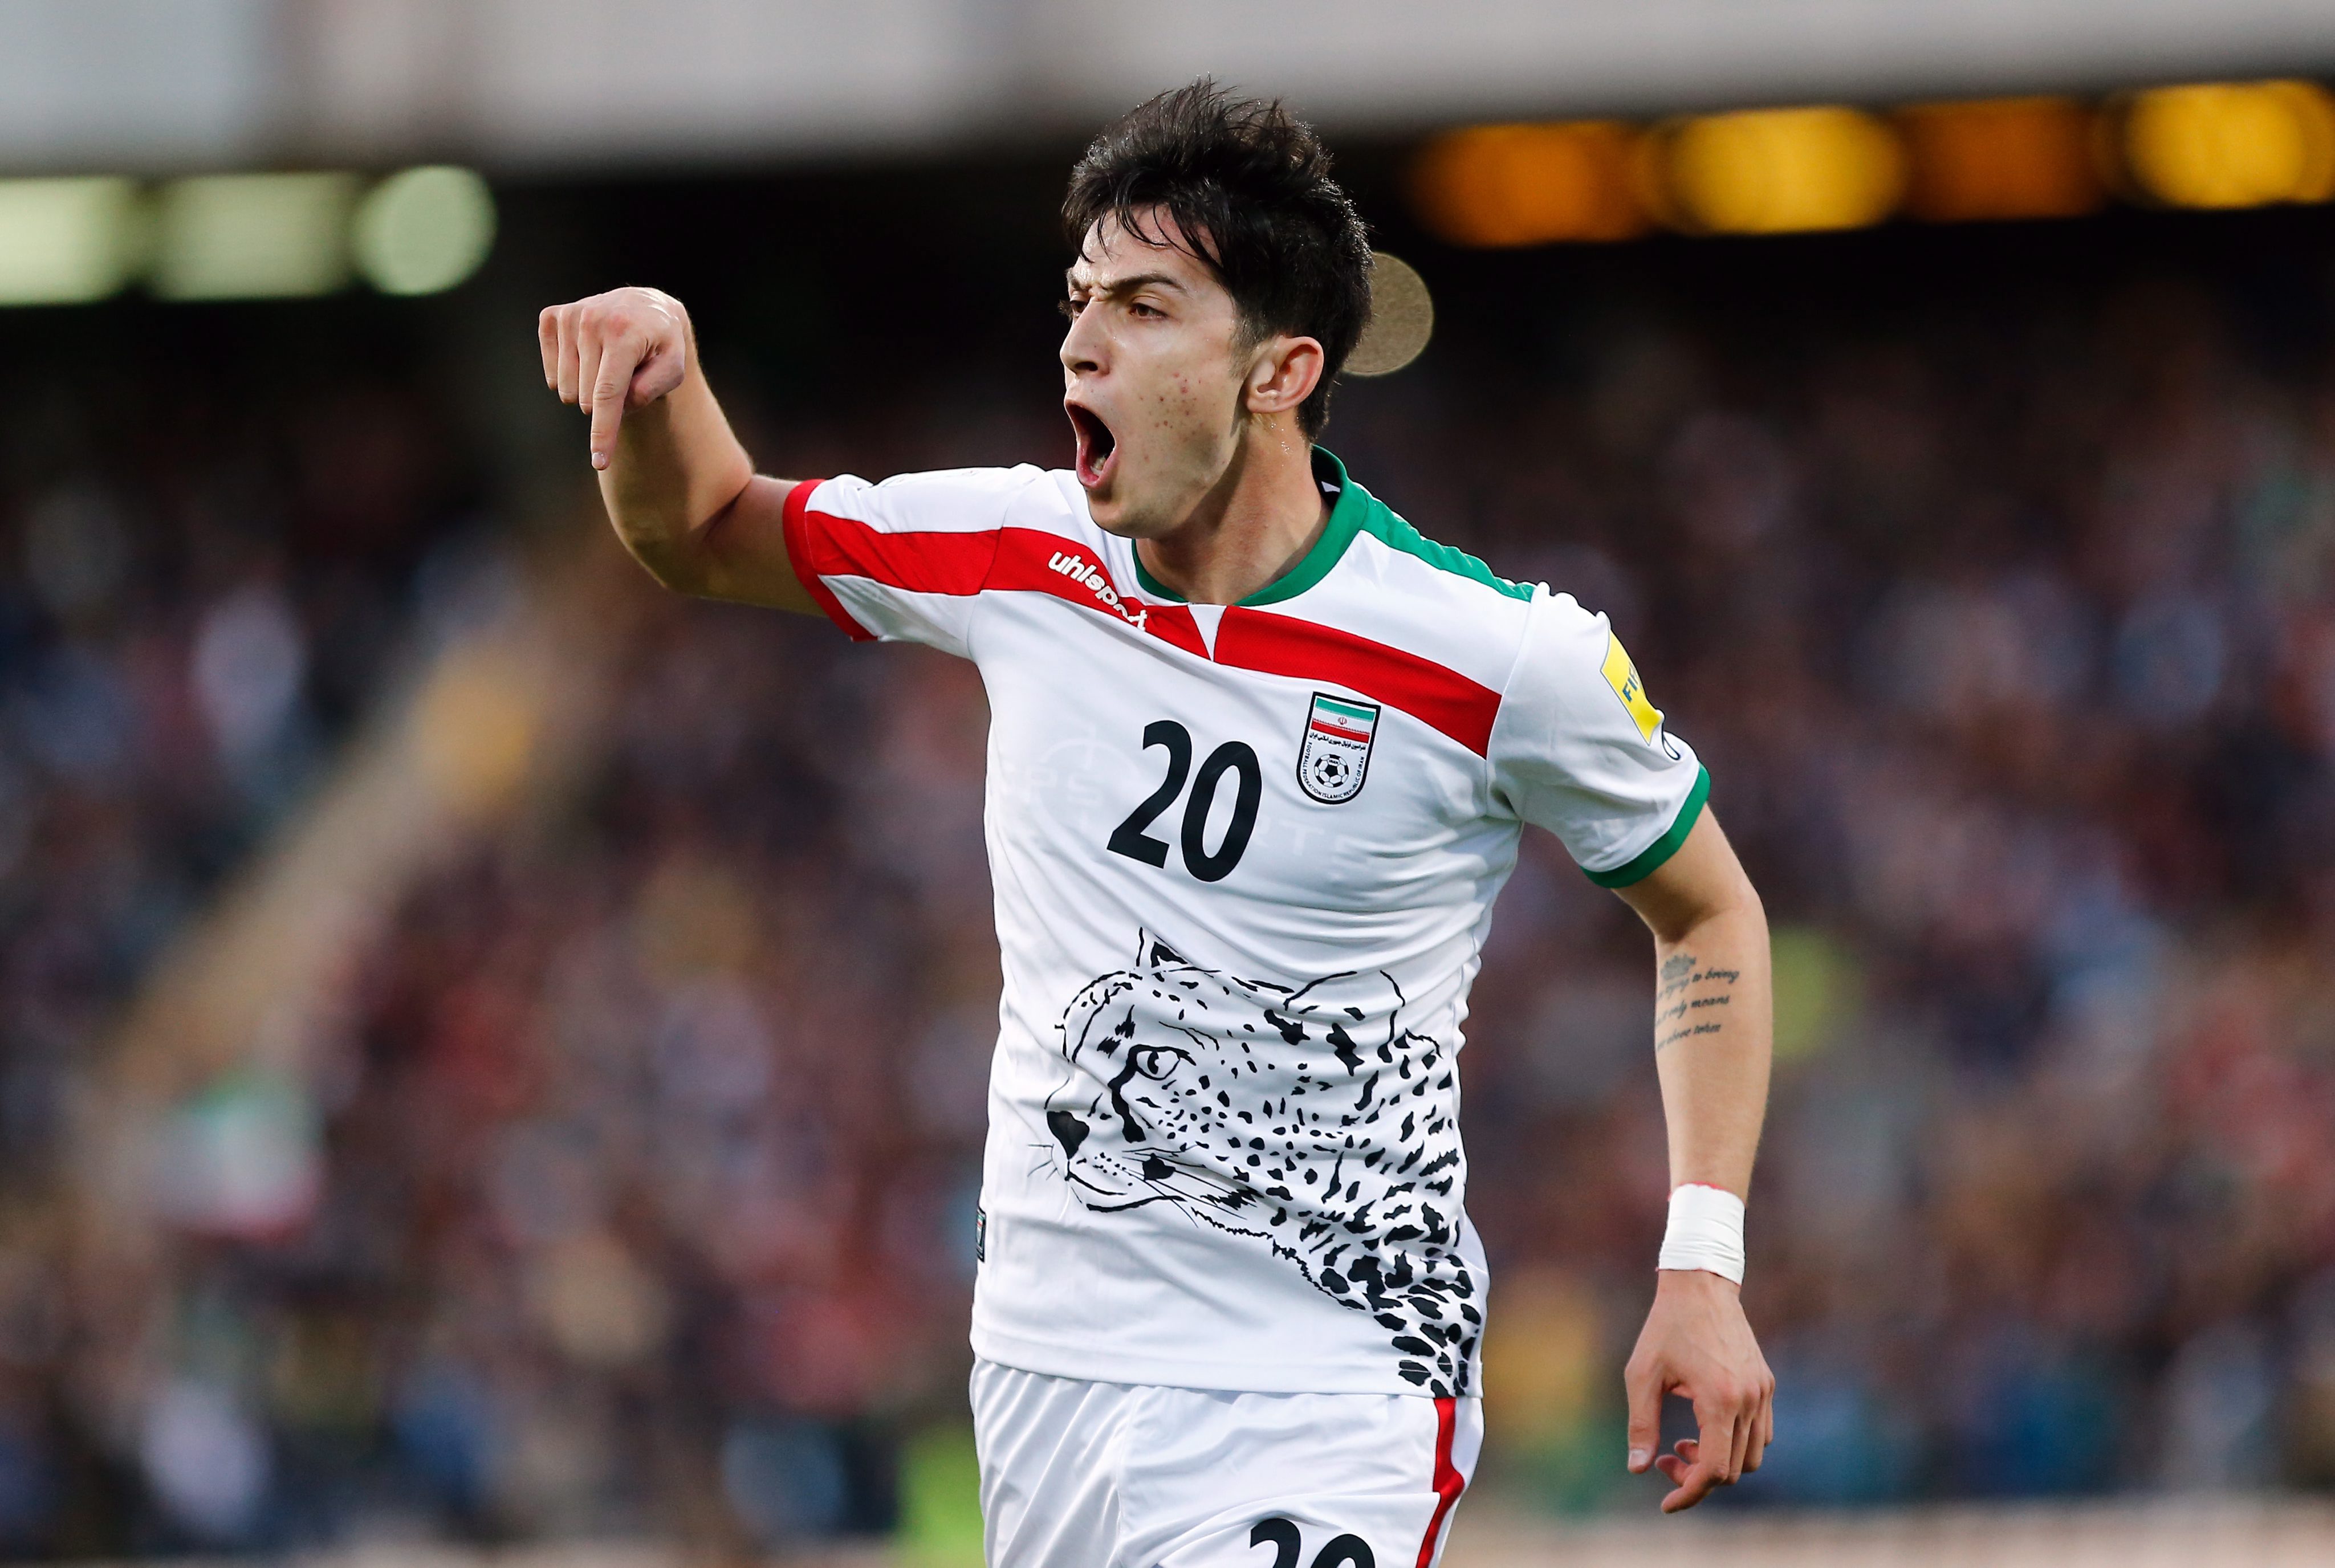 Any hope Iran might have at the World Cup will be firmly pinned on young forward Sardar Azmoun's shoulders. (Photo courtesy: AFP/Getty)